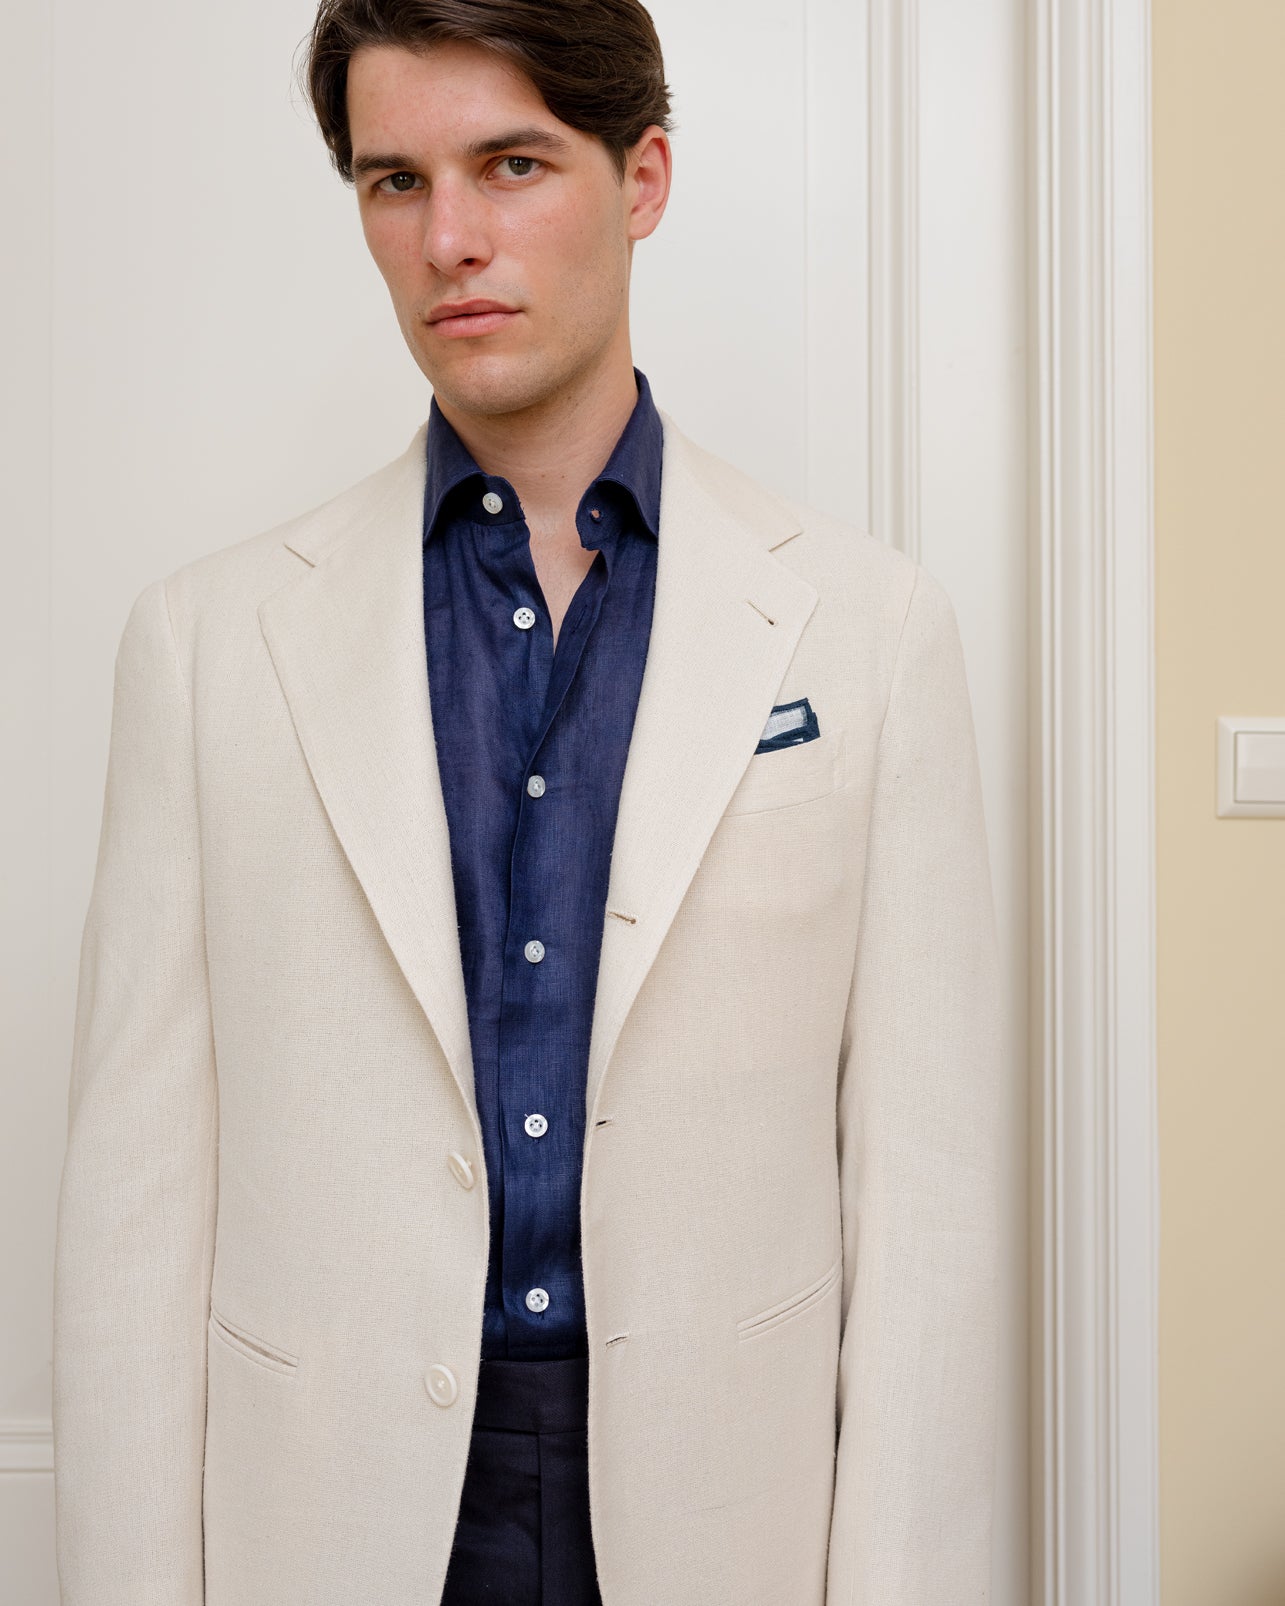 Cream silk sport coat combined with navy linen shirt and navy cotton trousers